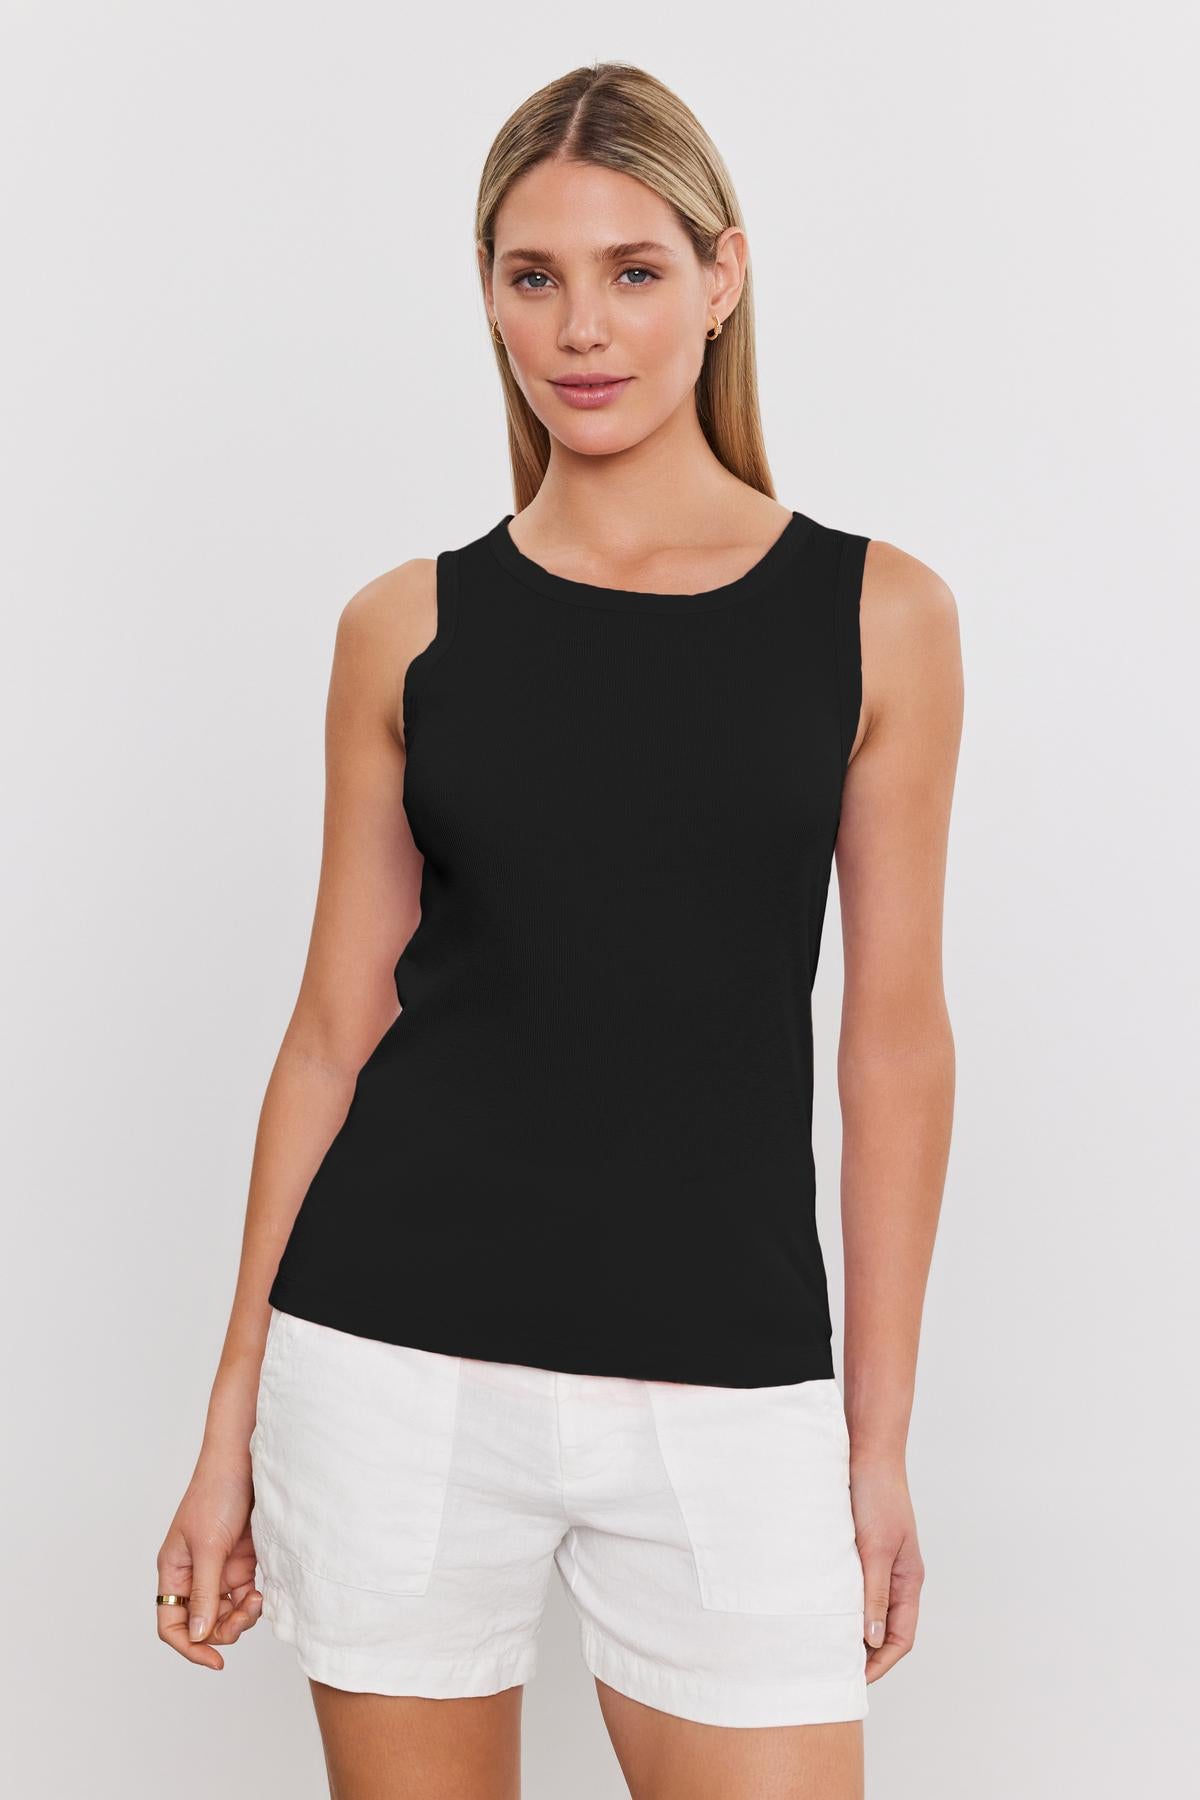 A woman with straight blonde hair, wearing a black sleeveless MAXIE RIBBED TANK TOP by Velvet by Graham & Spencer and white shorts, stands against a plain white background.-37241154339009